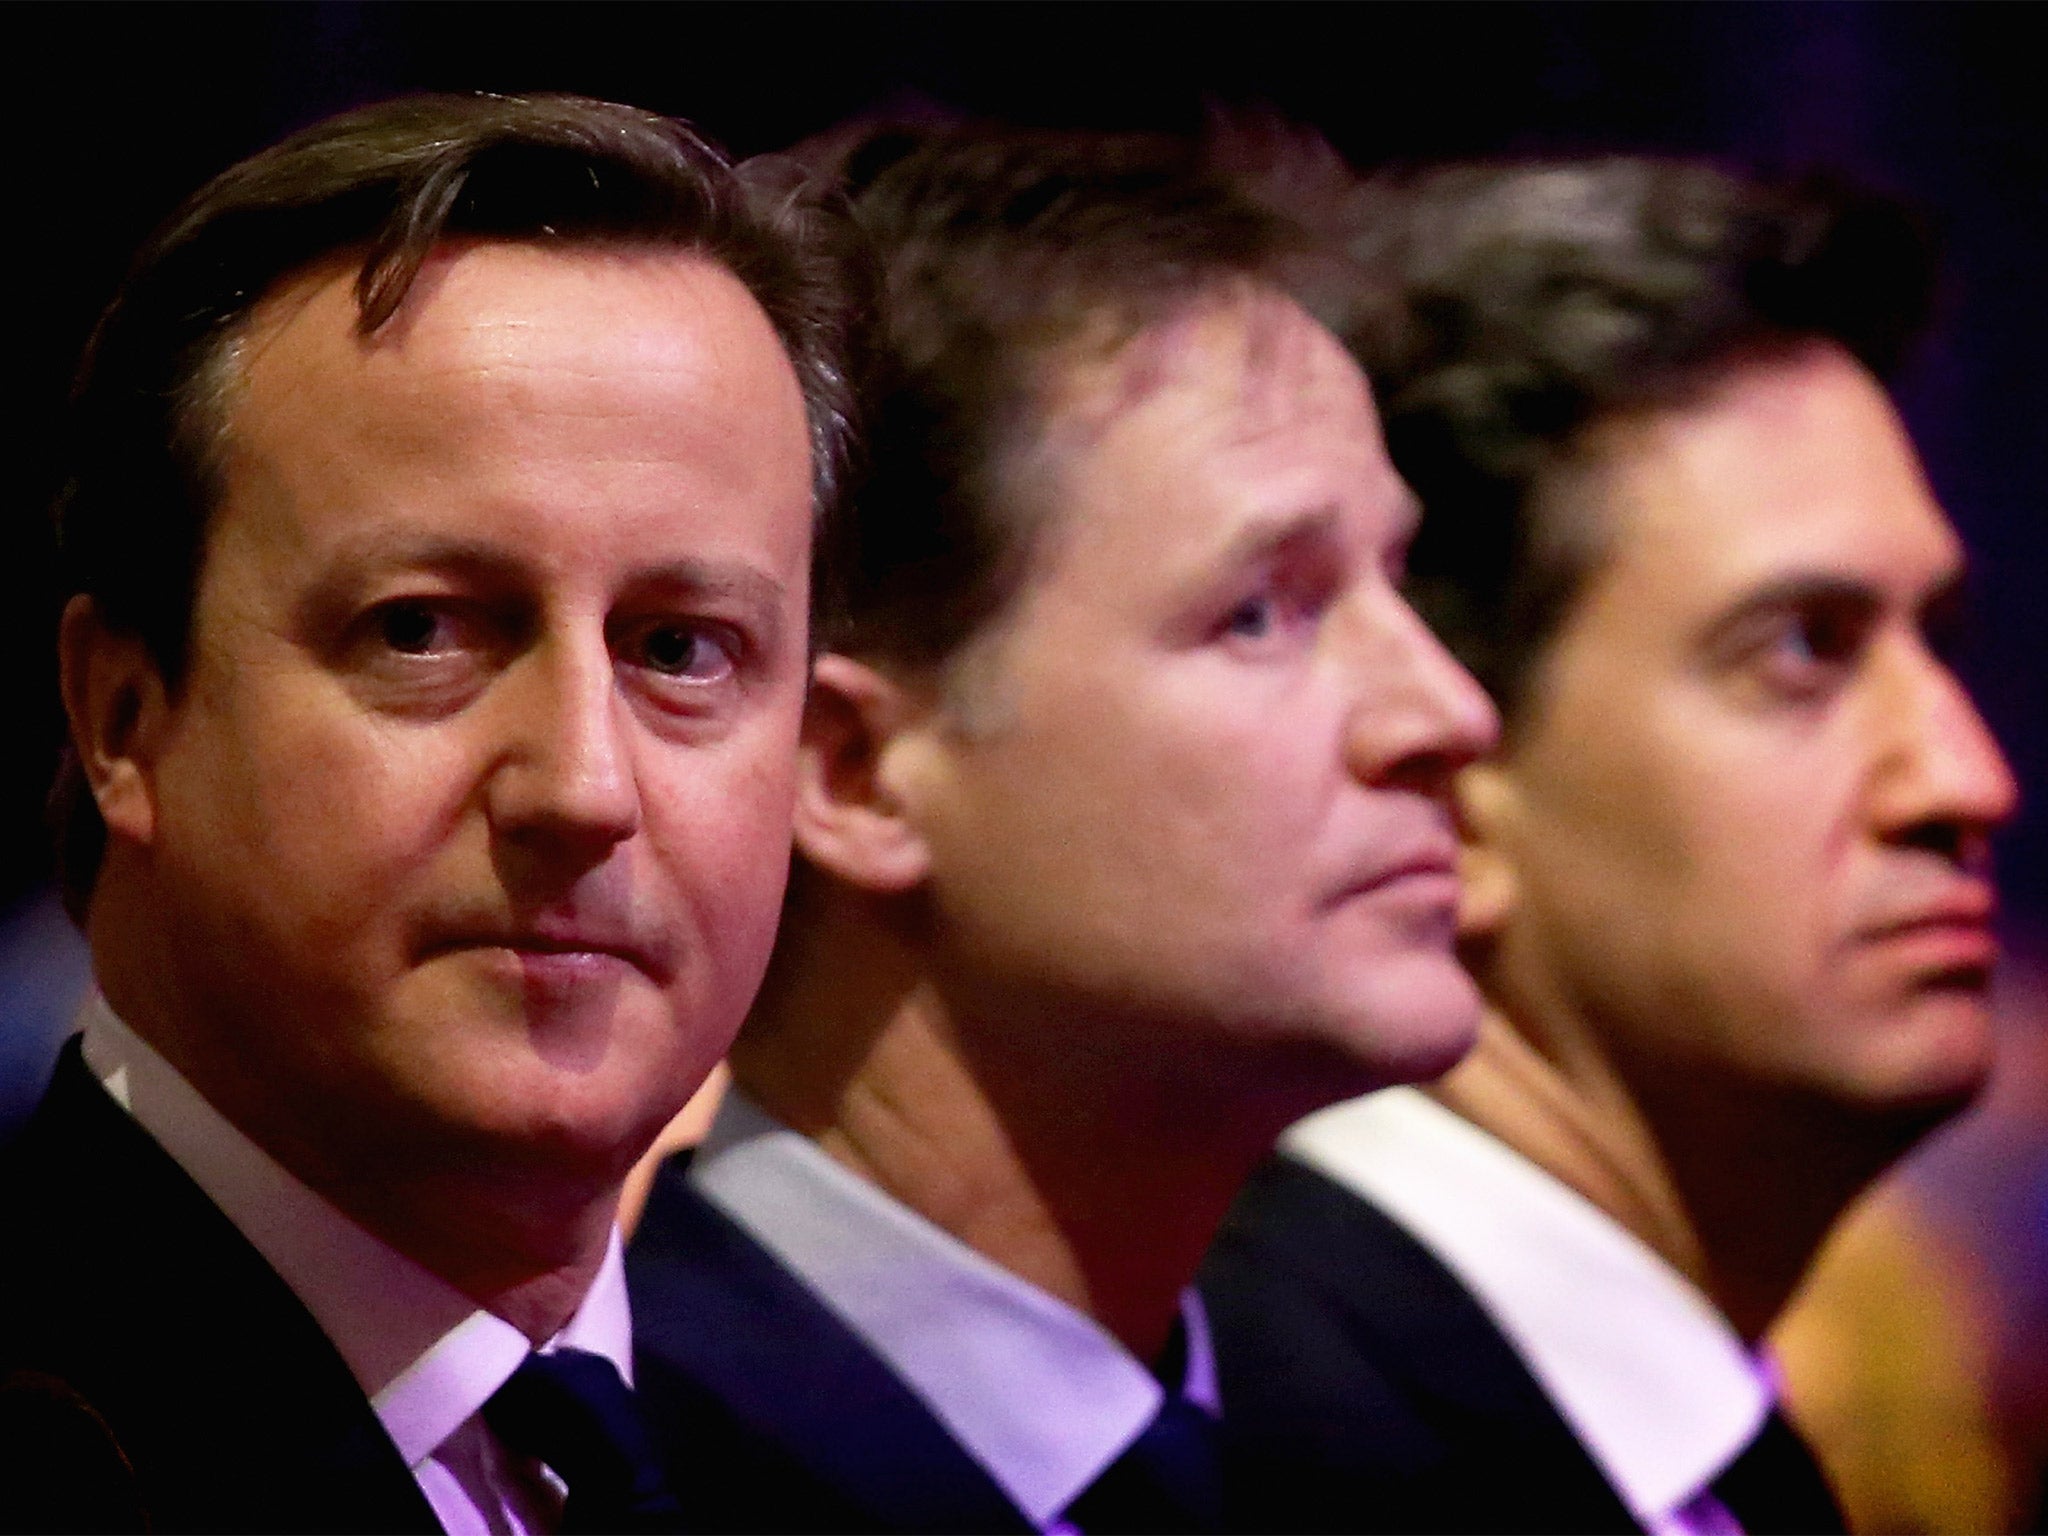 The Prime Minister is trying to 'wriggle out' of the televised debates, says Ed Miliband